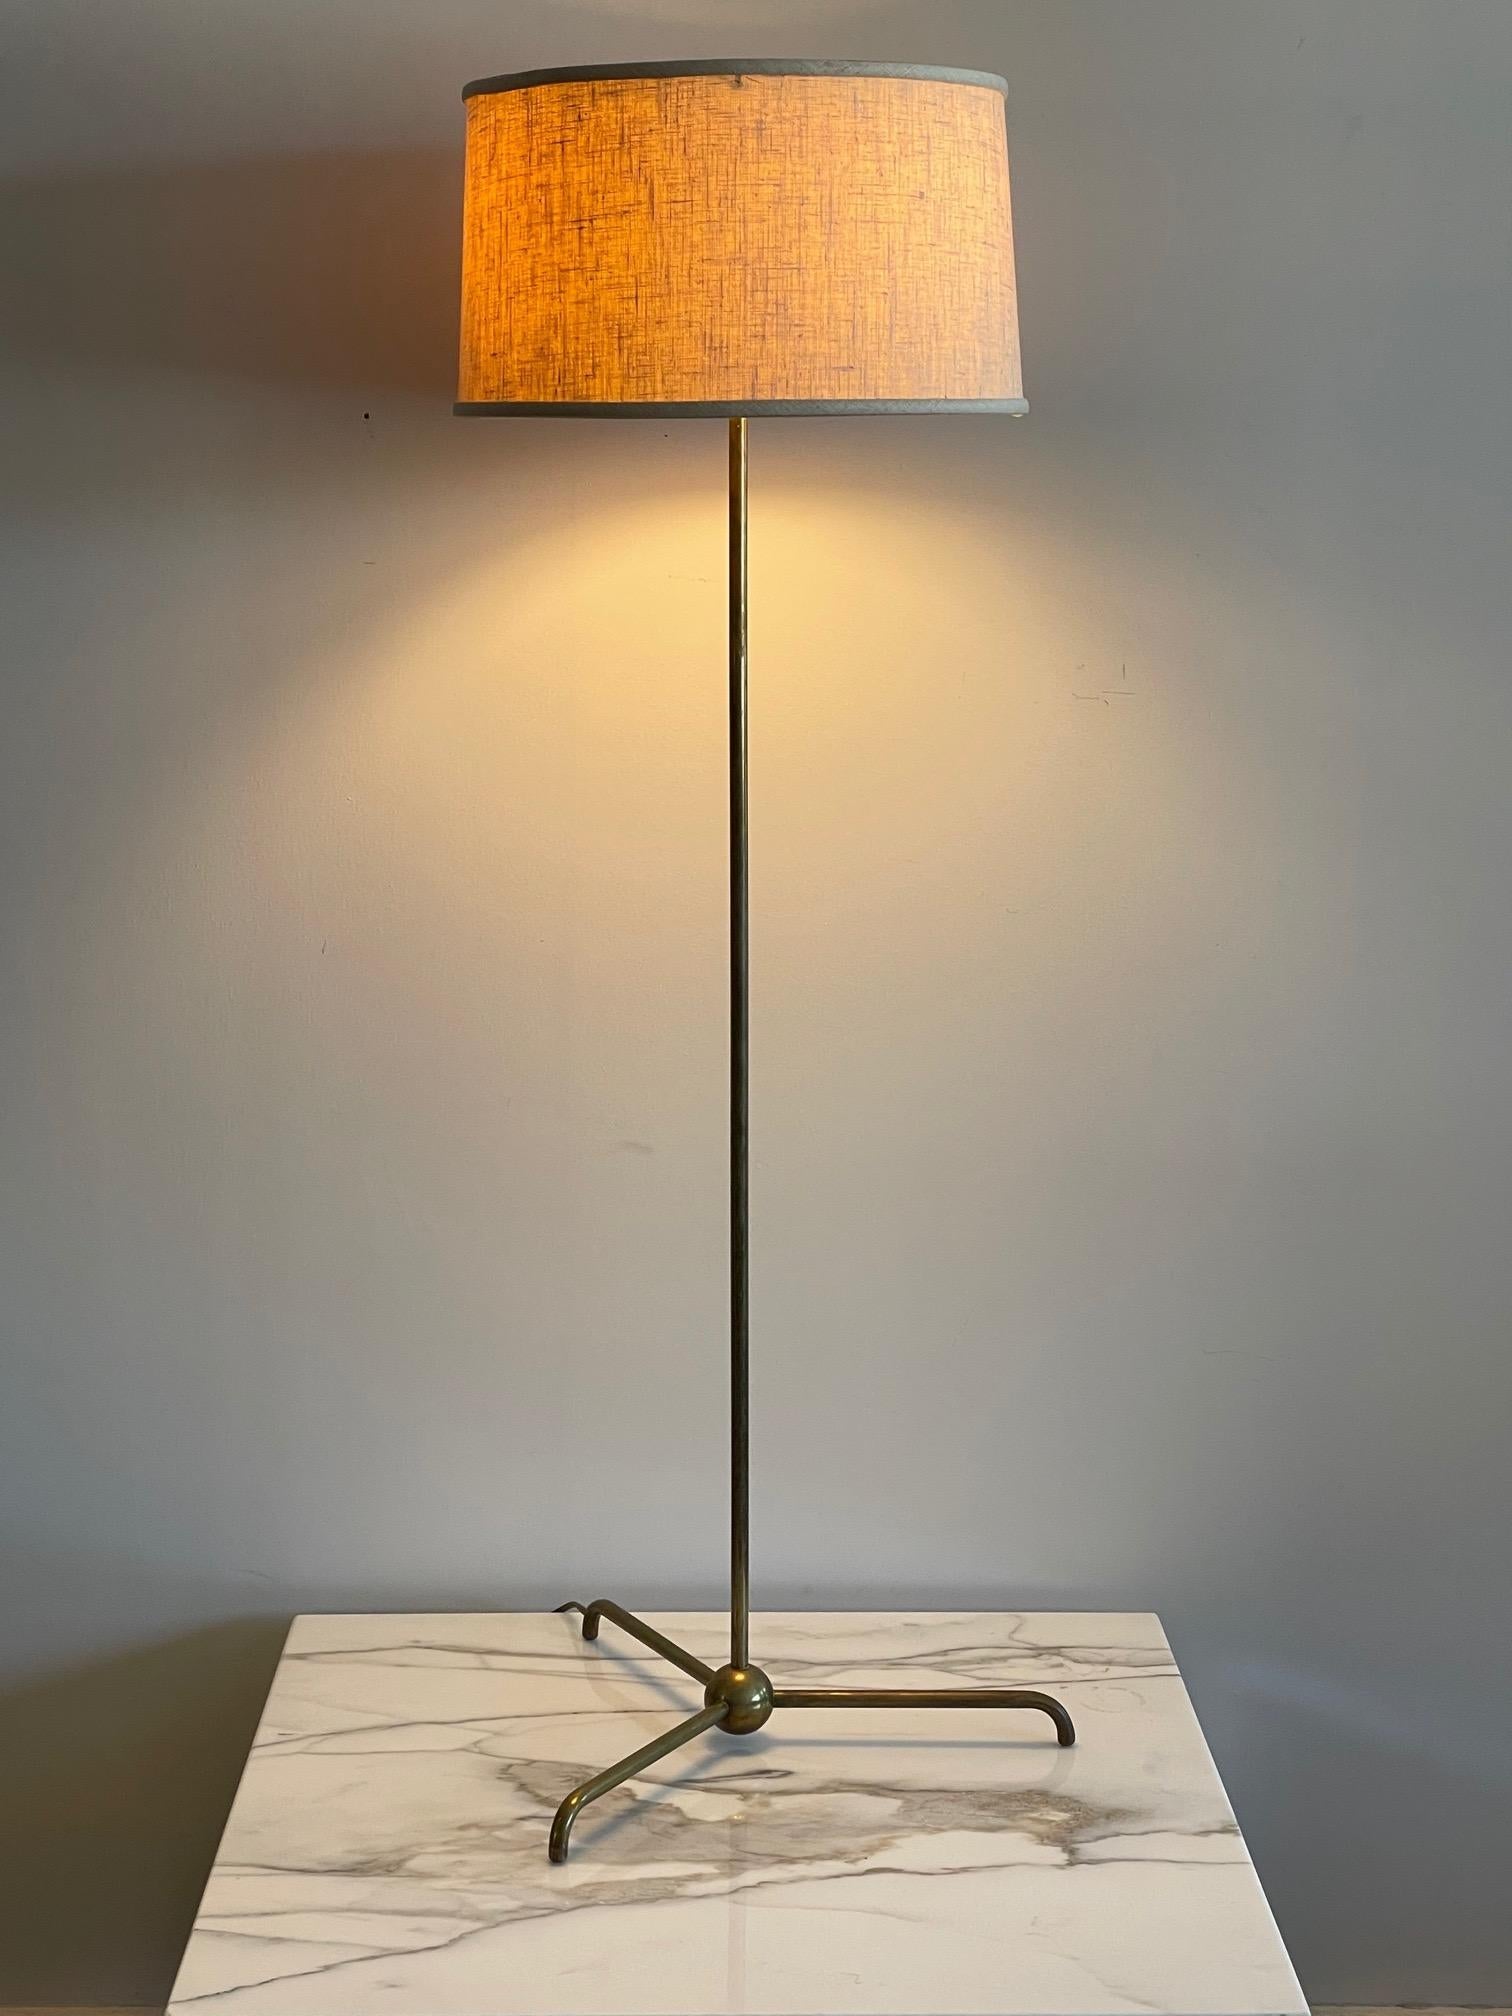 A rare T.H.Robsjohn-Gibbings designed for Widdicomb floor lamp. Brass with original shade and finial. Model #213 in the Widdicomb catalog.